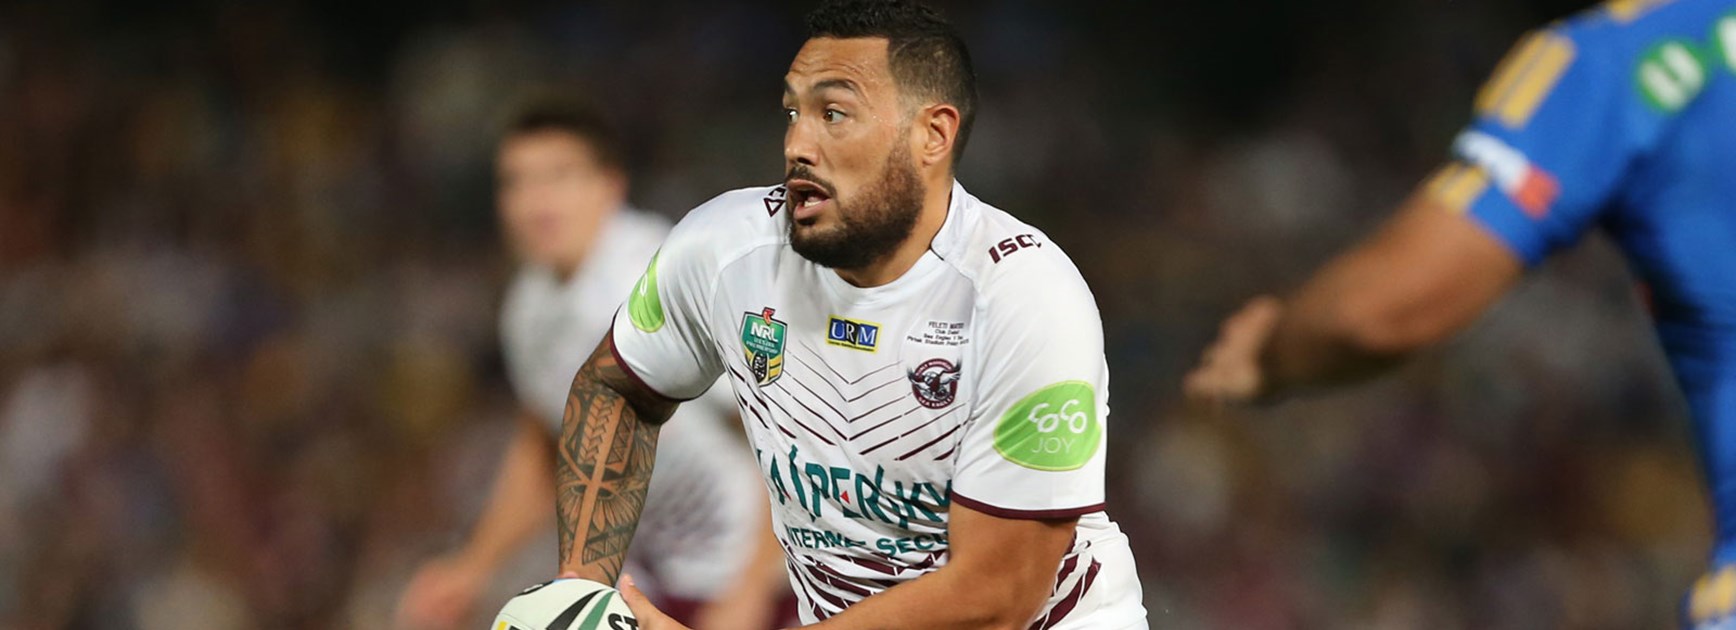 Feleti Mateo is a chance of returning for Manly's Round 9 clash with the Knights at Brookvale Oval.